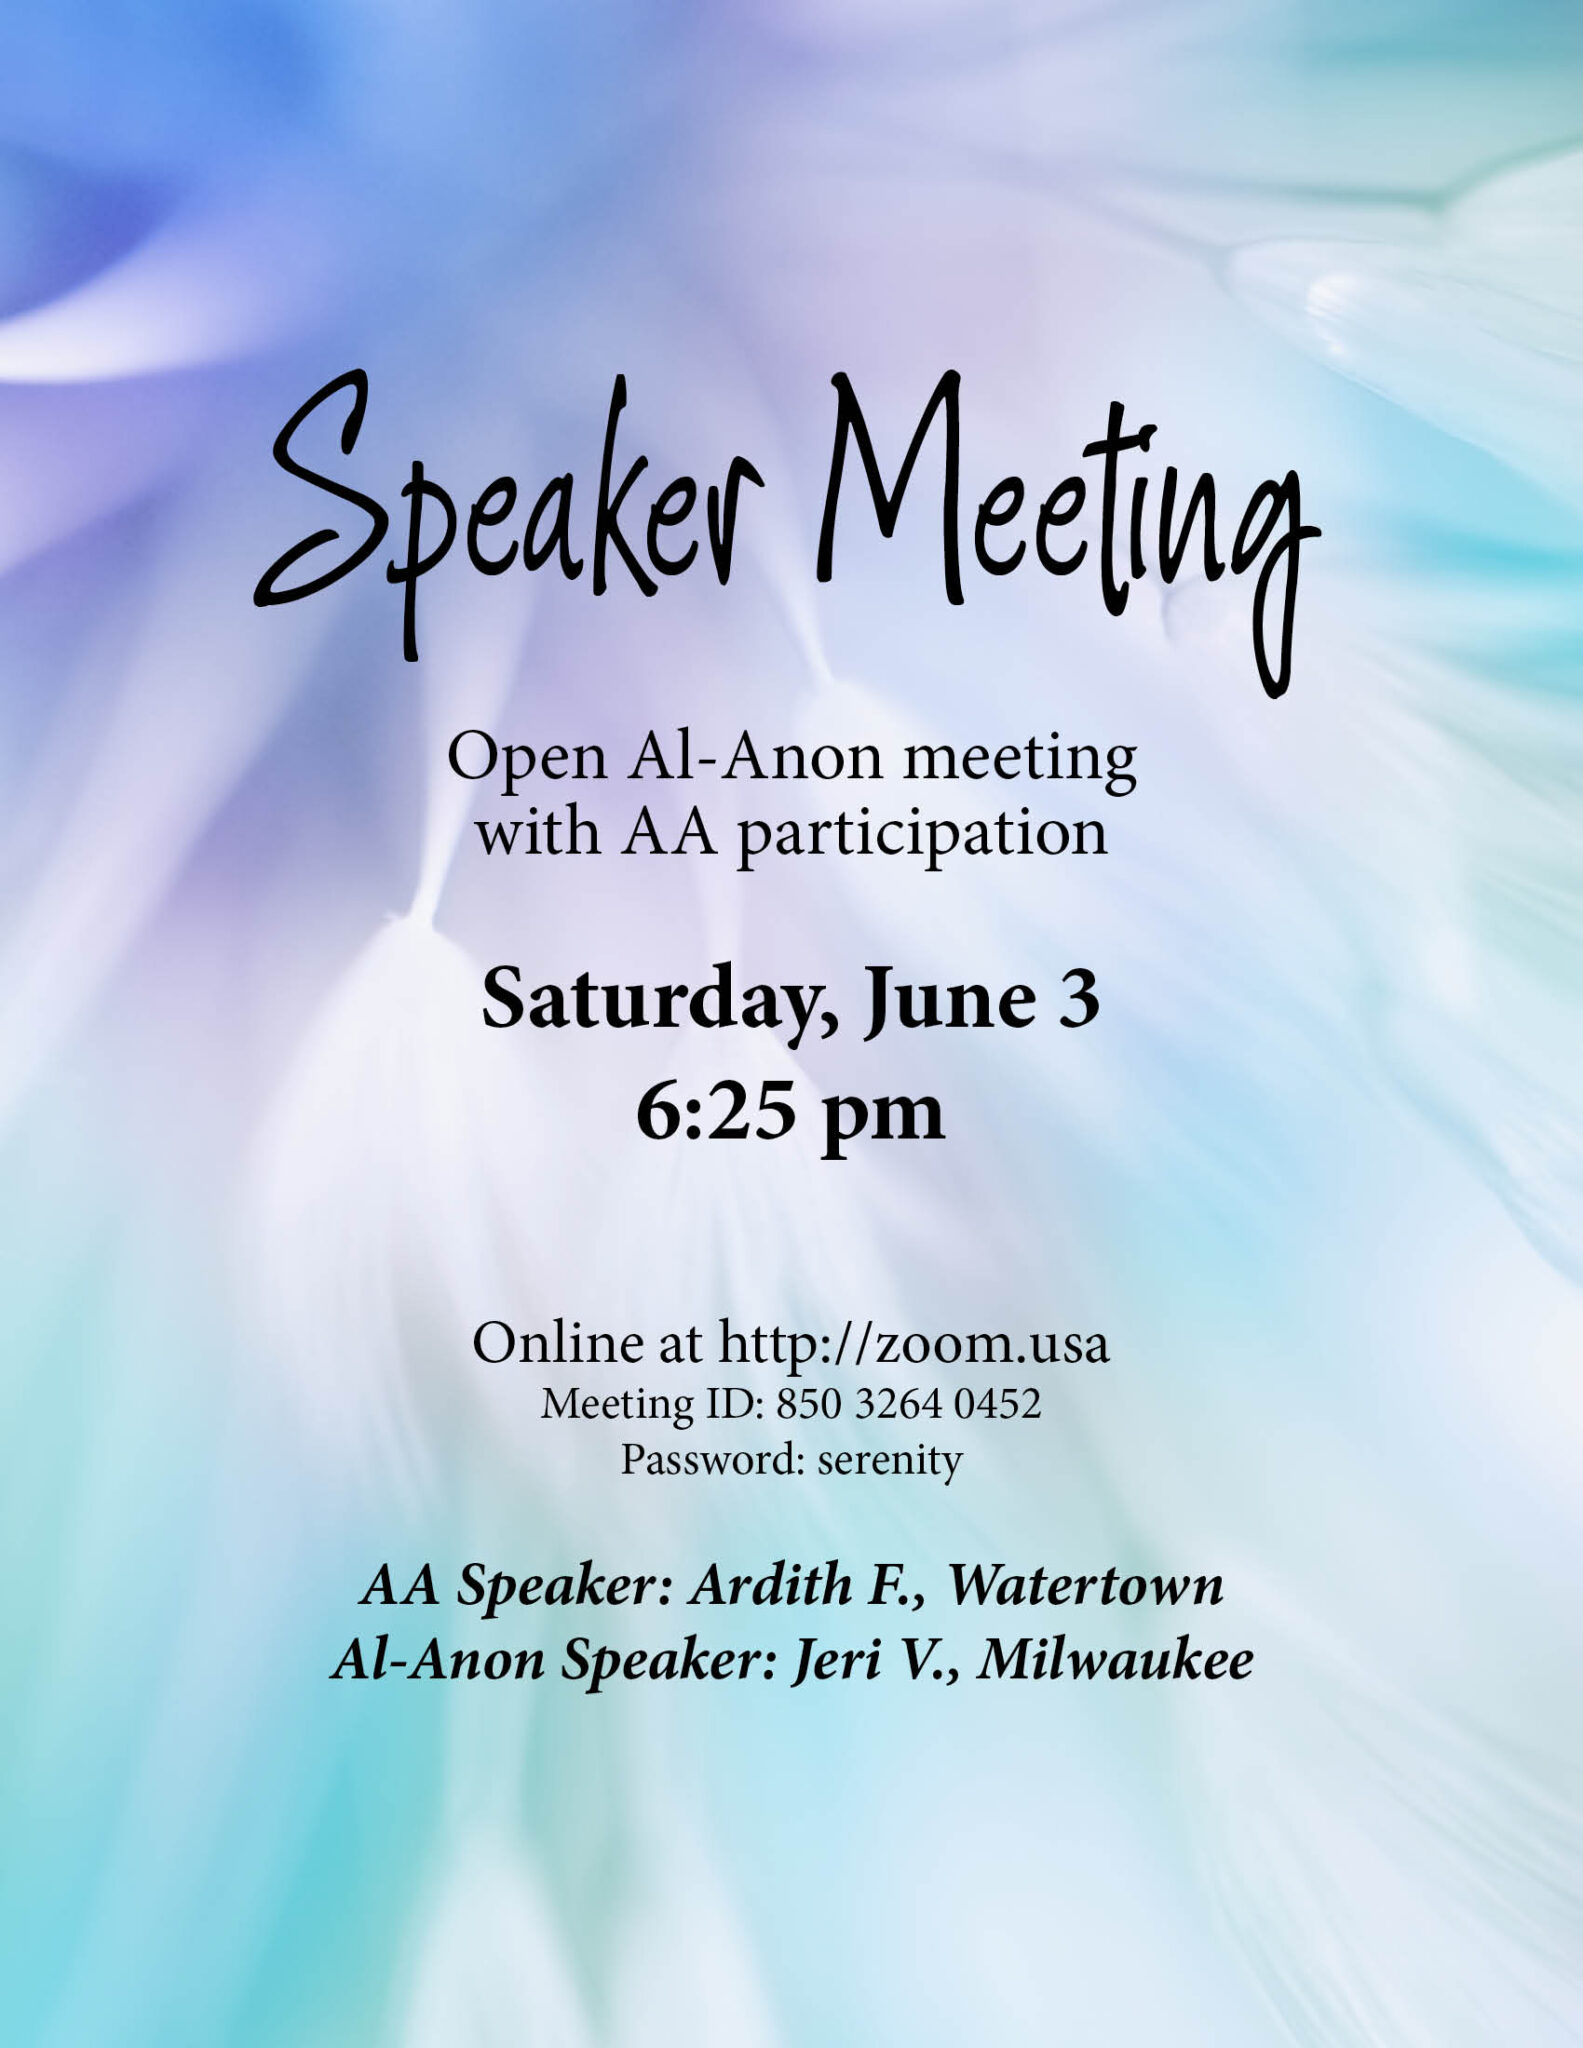 Open AlAnon Meeting with AA Participation, Saturday, June 5, 625pm on